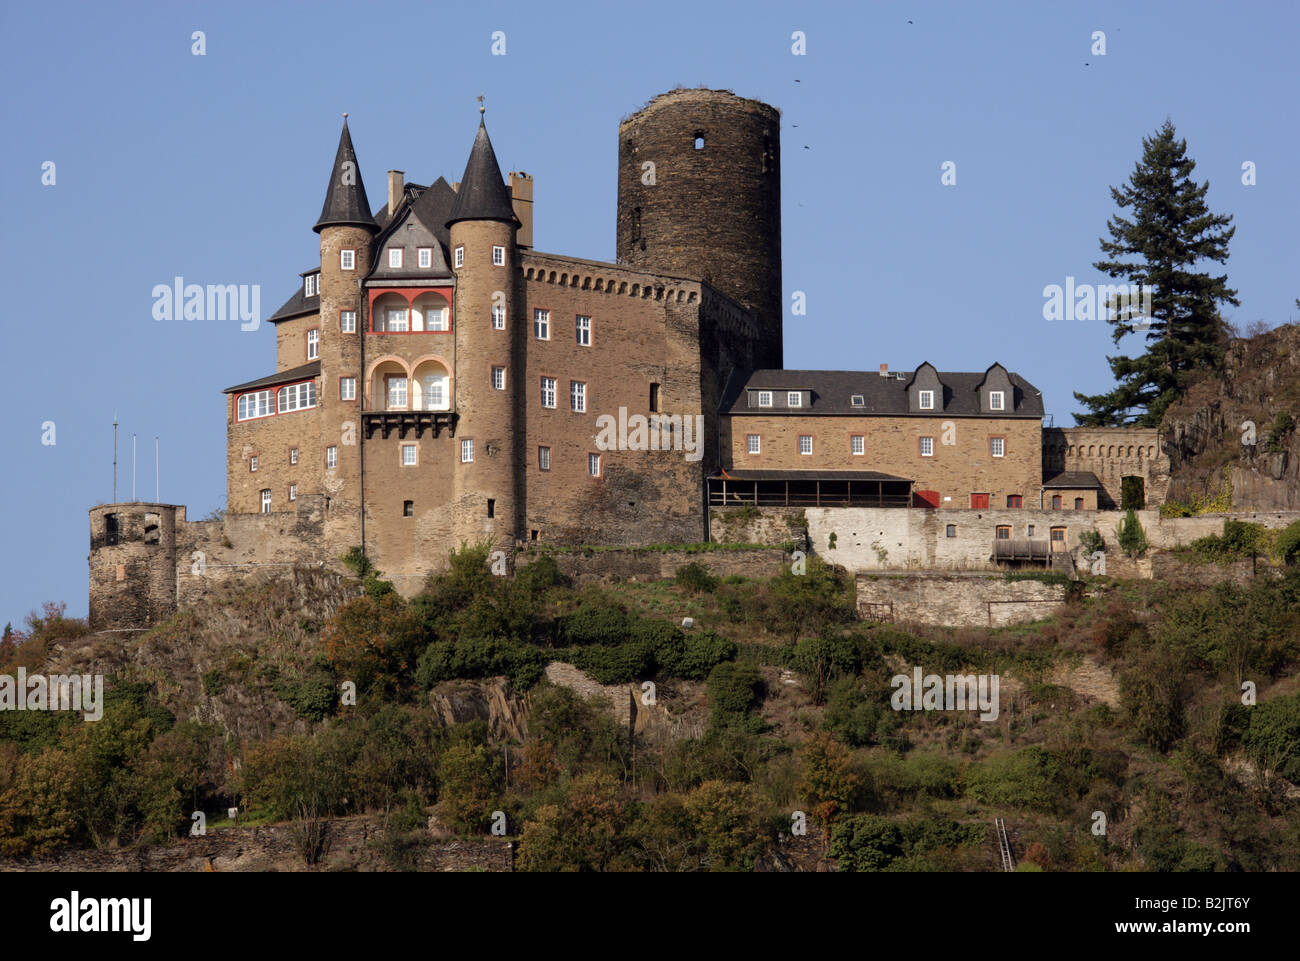 architecture, castles, Germany, Rhineland-Palatinate, Burg Katz near St. Goarshausen on the Rhine, built: 1371 by Count Wilhelm II of Katzenelnbogen, exterior view, , Additional-Rights-Clearance-Info-Not-Available Stock Photo